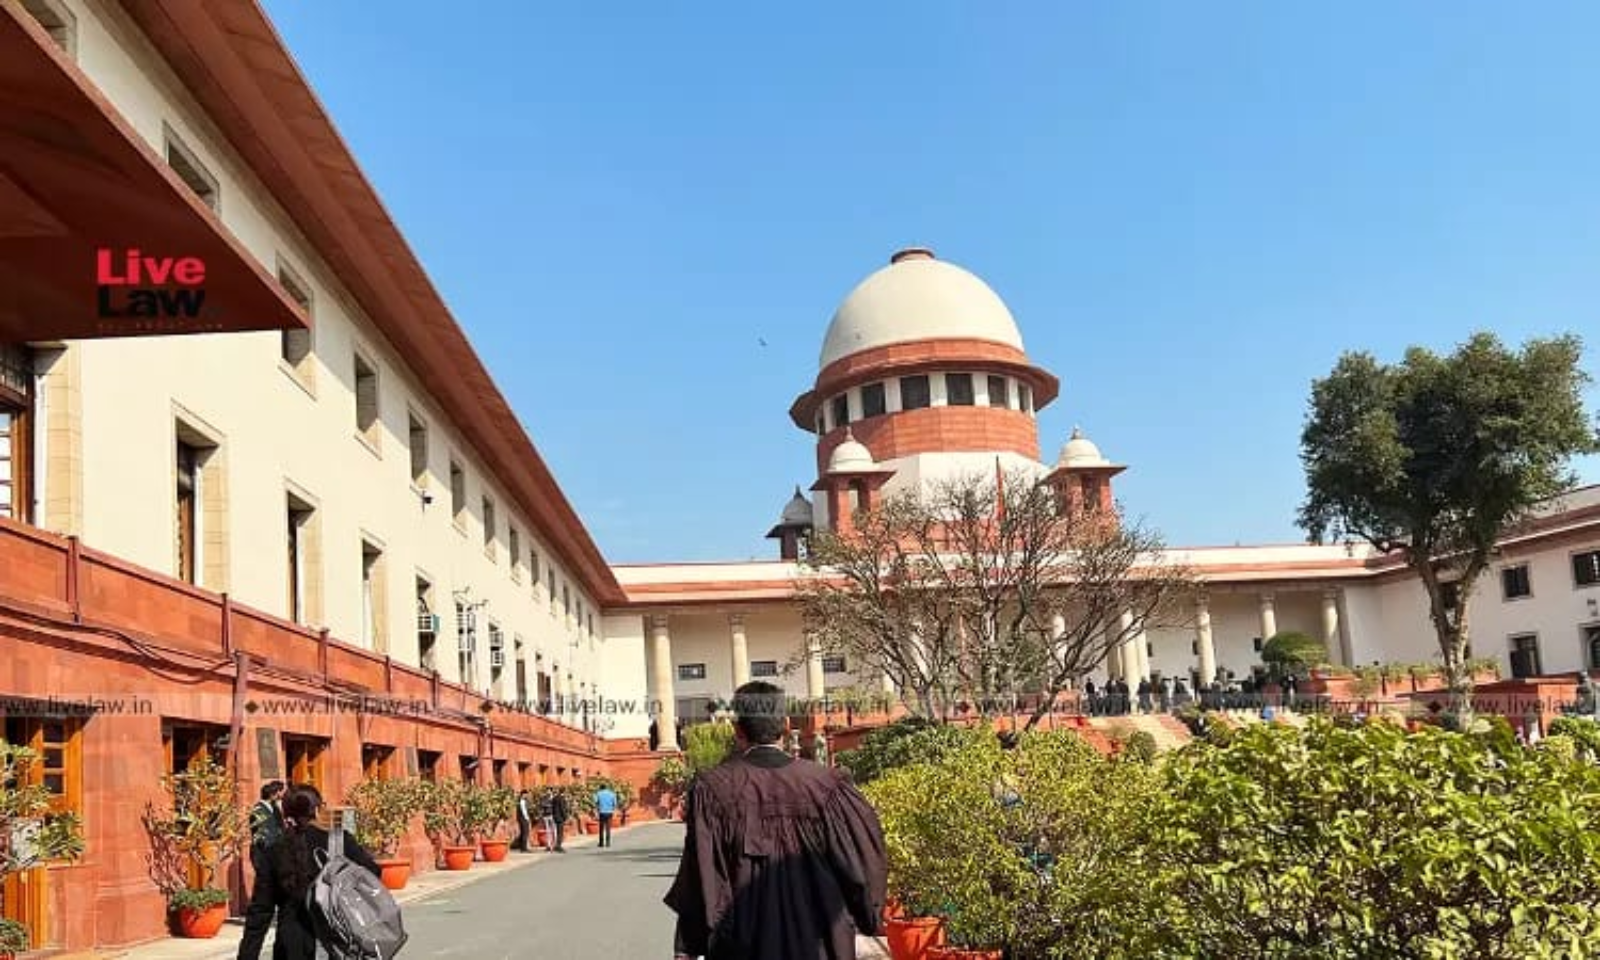 Repa Porn Video Download - Substantial Progress Made To Prevent Circulation Of Child Porn, Rape Videos  On Social Media': Supreme Court Closes PIL